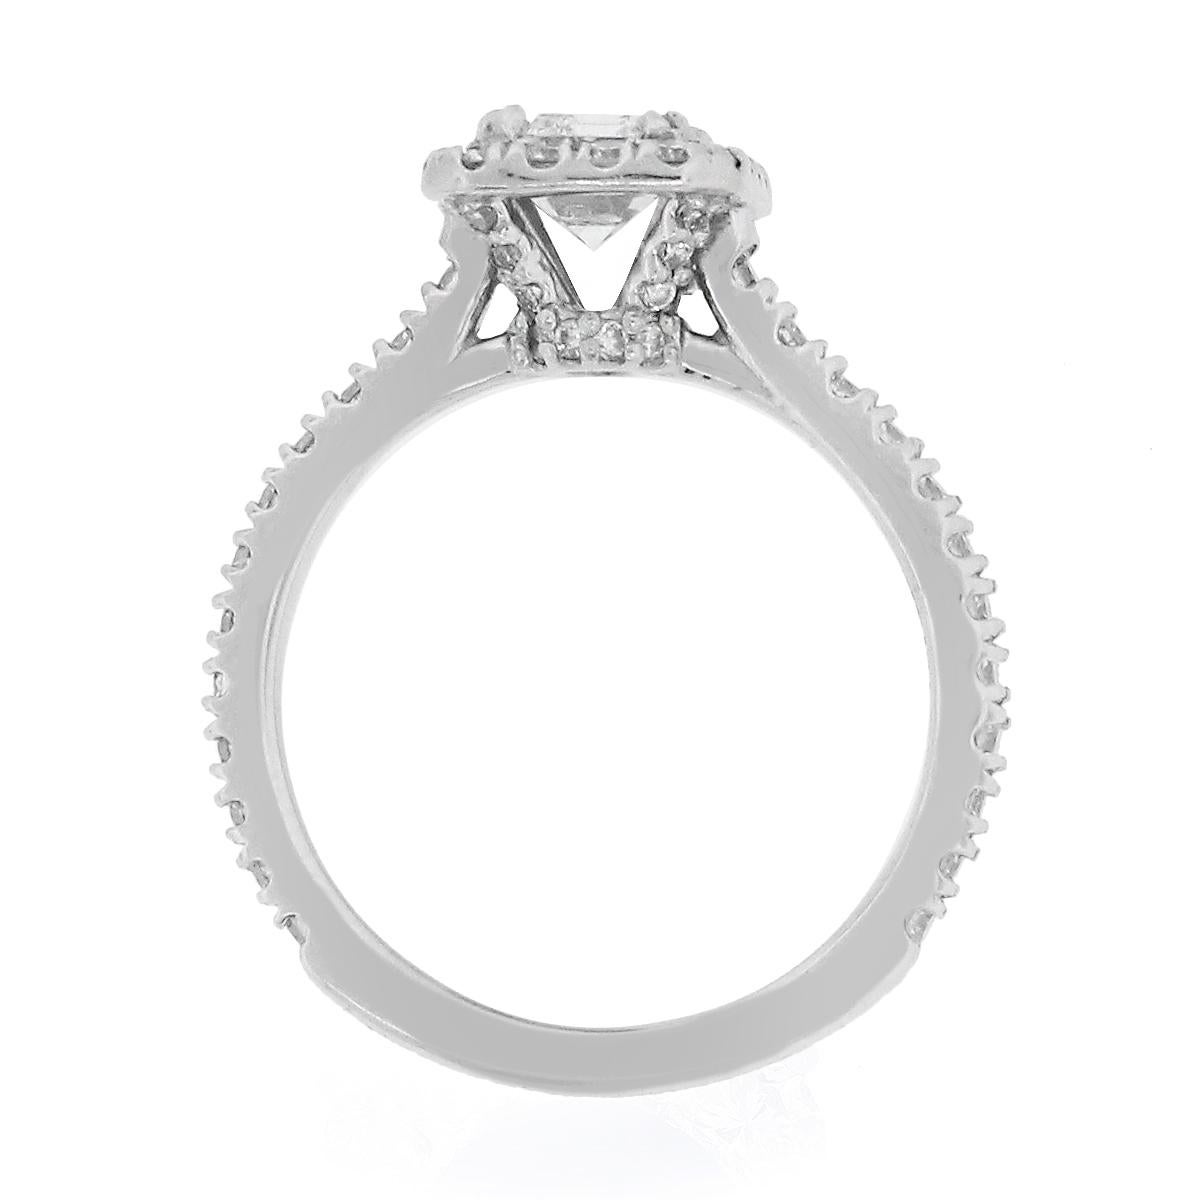 Material: Platinum
Diamond Details: 0.83ct Center emerald cut diamond. Center diamond is GIA Certified (#1166509213) center diamond is F in color and VVS1 in clarity.
Accent Diamond Details: Approximately 0.75ctw of Diamonds. Diamonds are G/H in